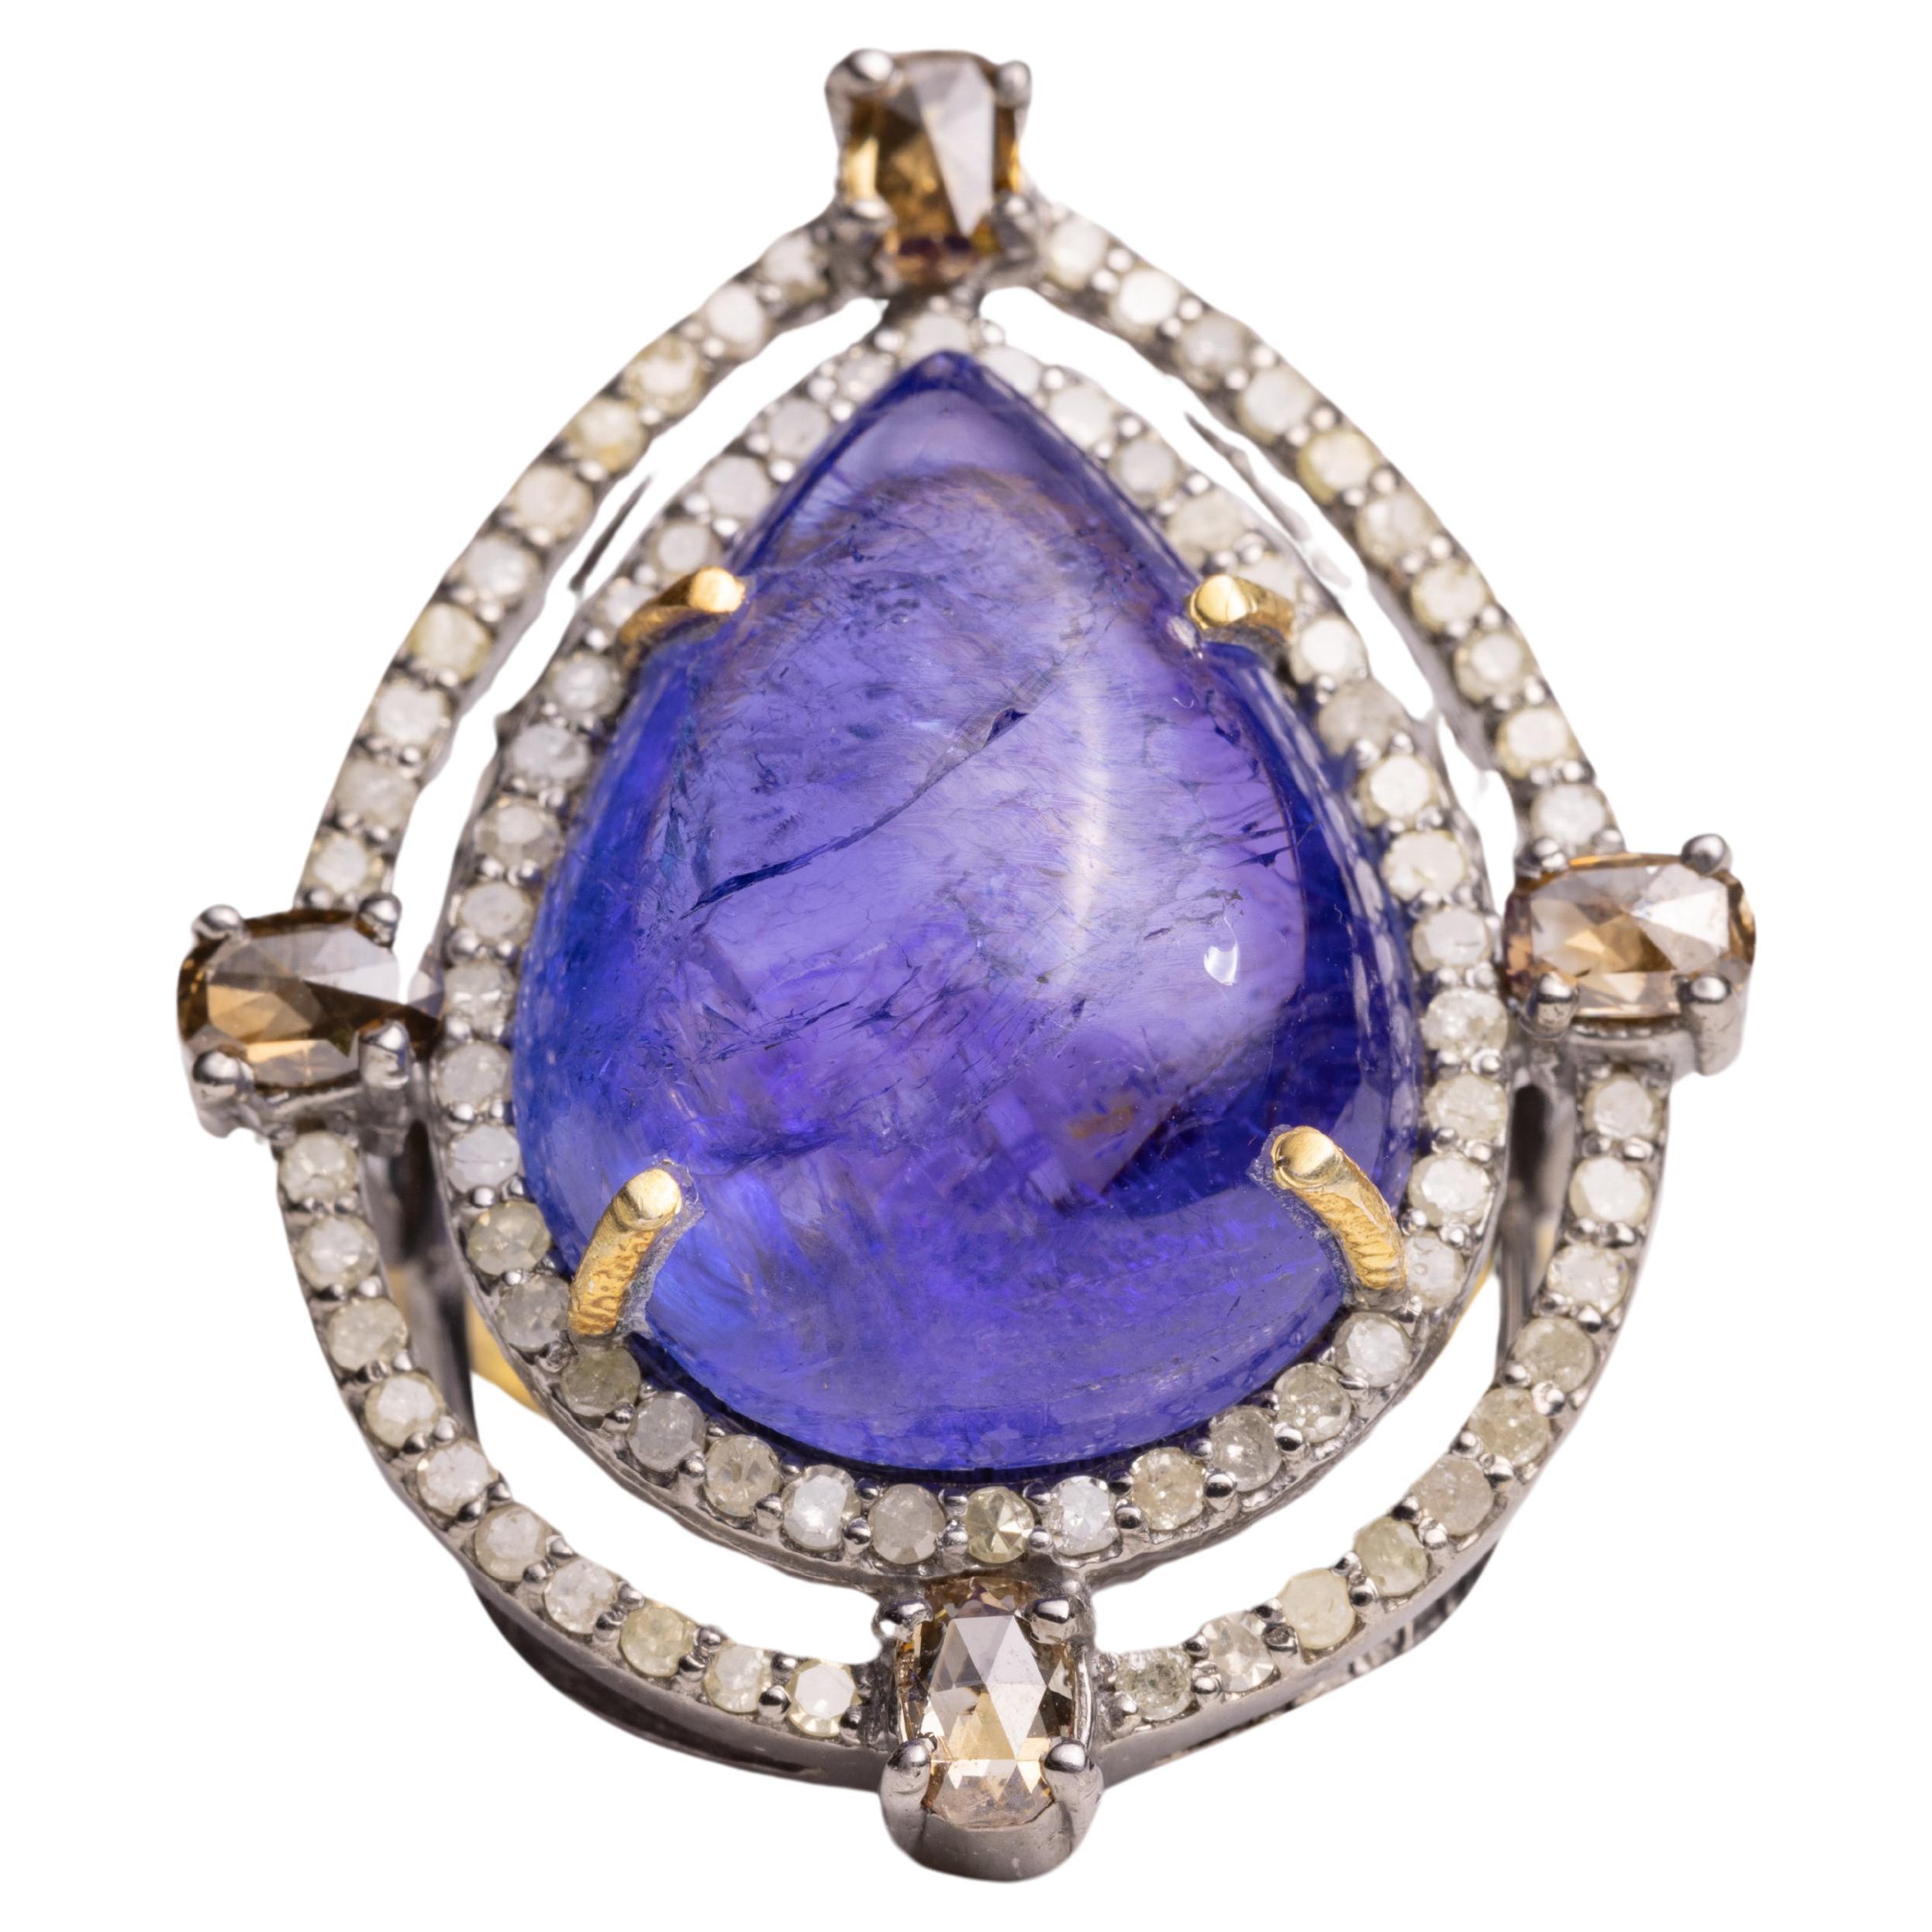 A lovely, large pear-shaped cabochon Tanzanite dome cocktail ring bordered with two rows of round, brilliant cut diamonds and champagne diamonds on the four sides.  Diamonds also along the shoulder of the band.  Set in sterling silver and 18K gold